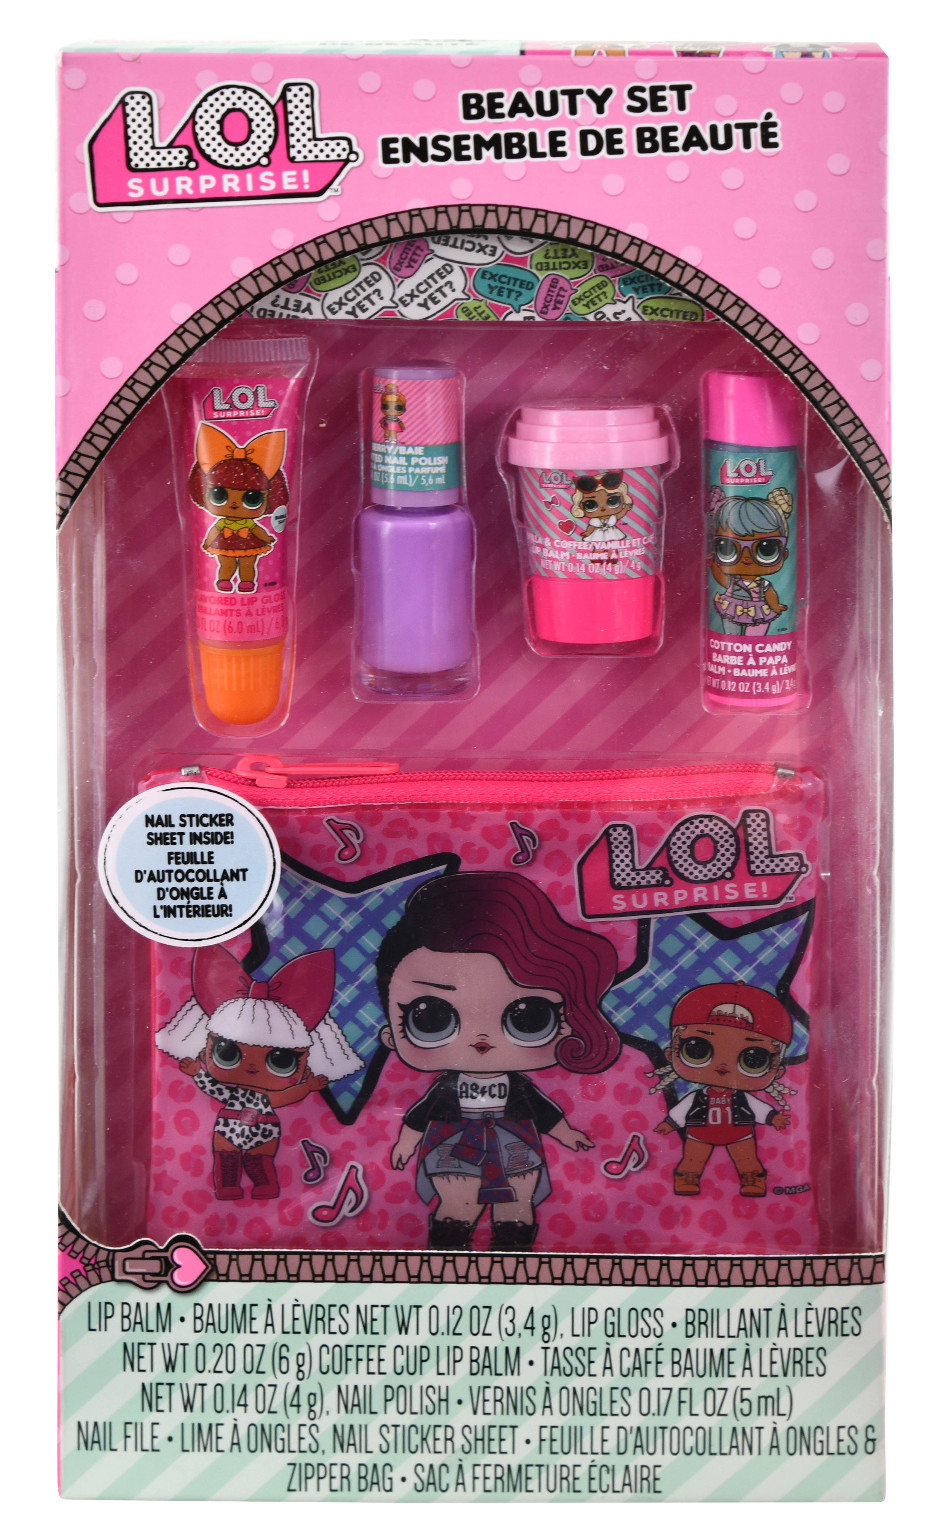 beauty set  Cotton Candy Fragrance and surprise flavor lip gloss new L.O.L